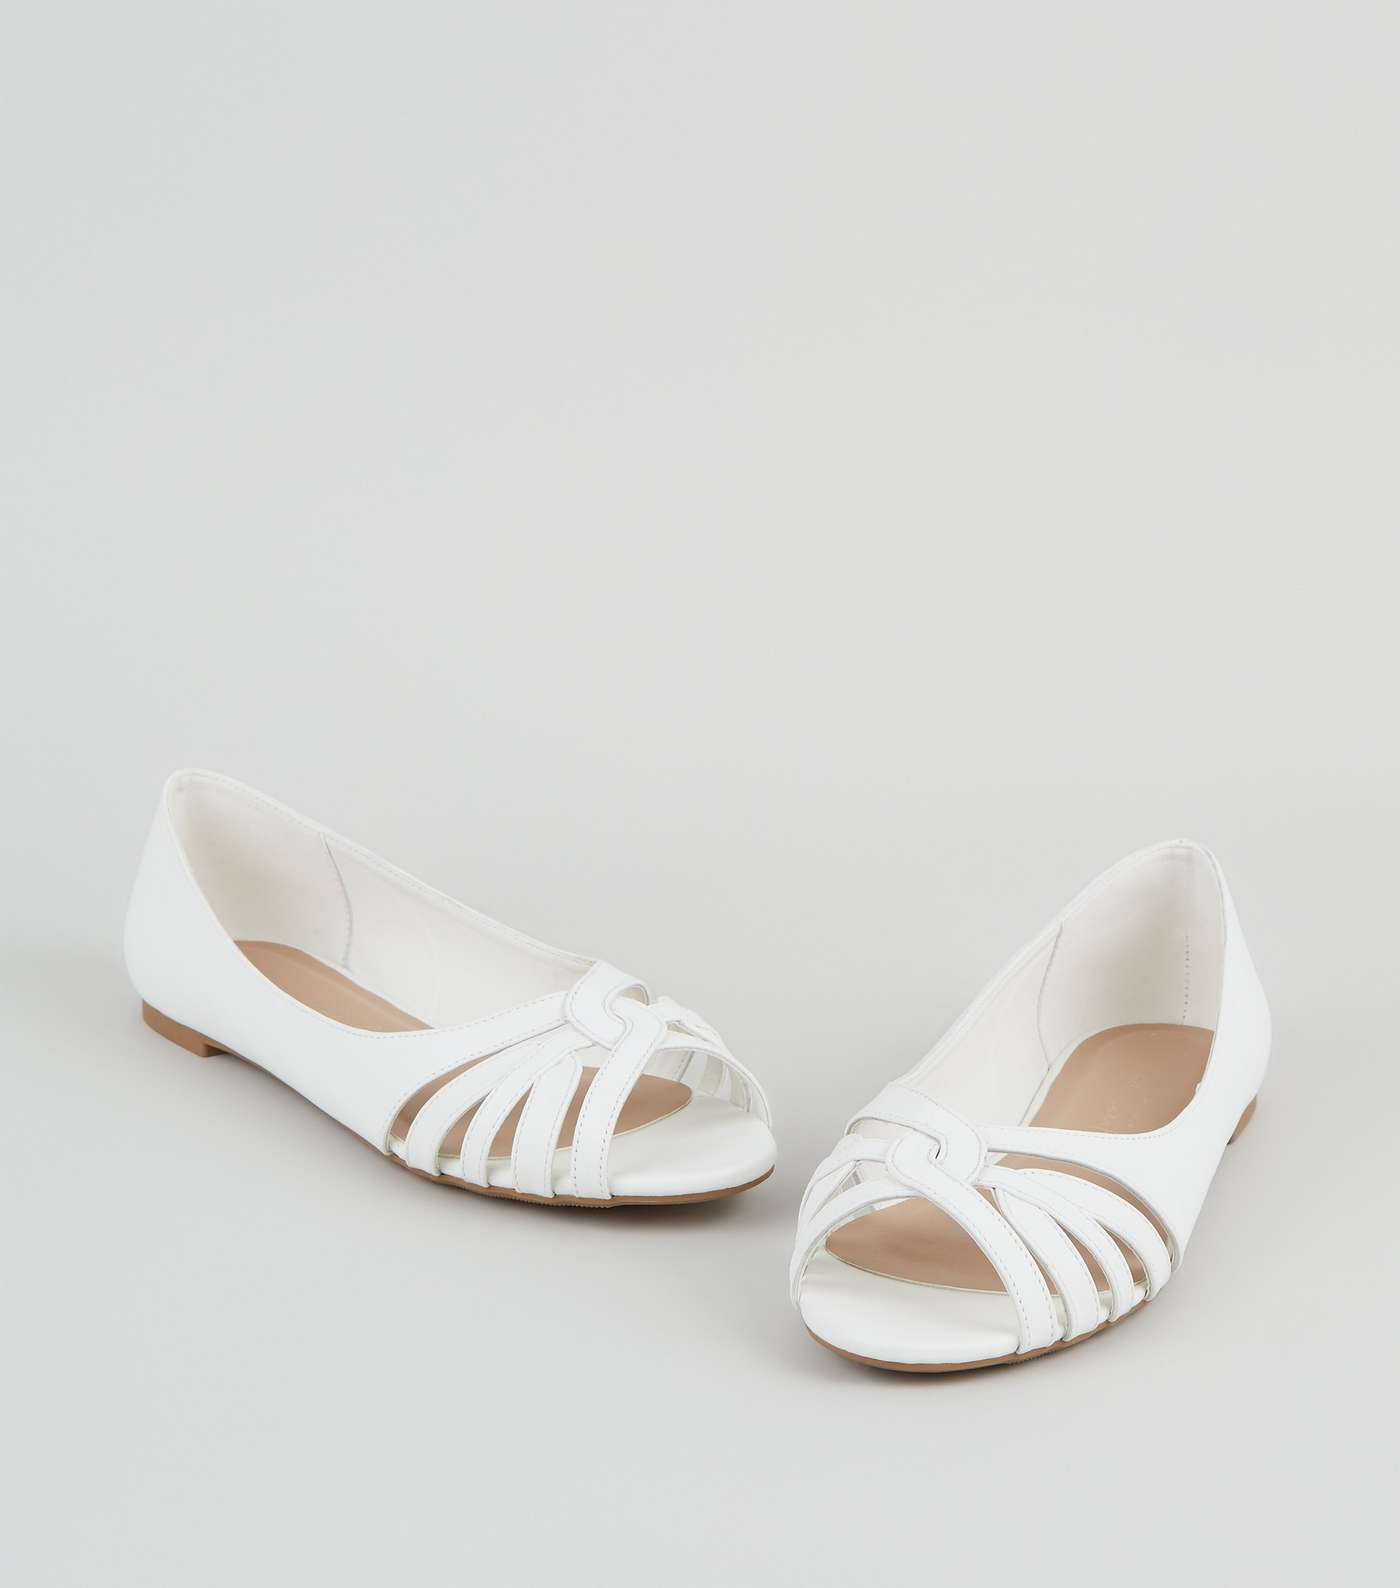 Wide Fit White Leather-Look Peep Toe Caged Sandals Image 3